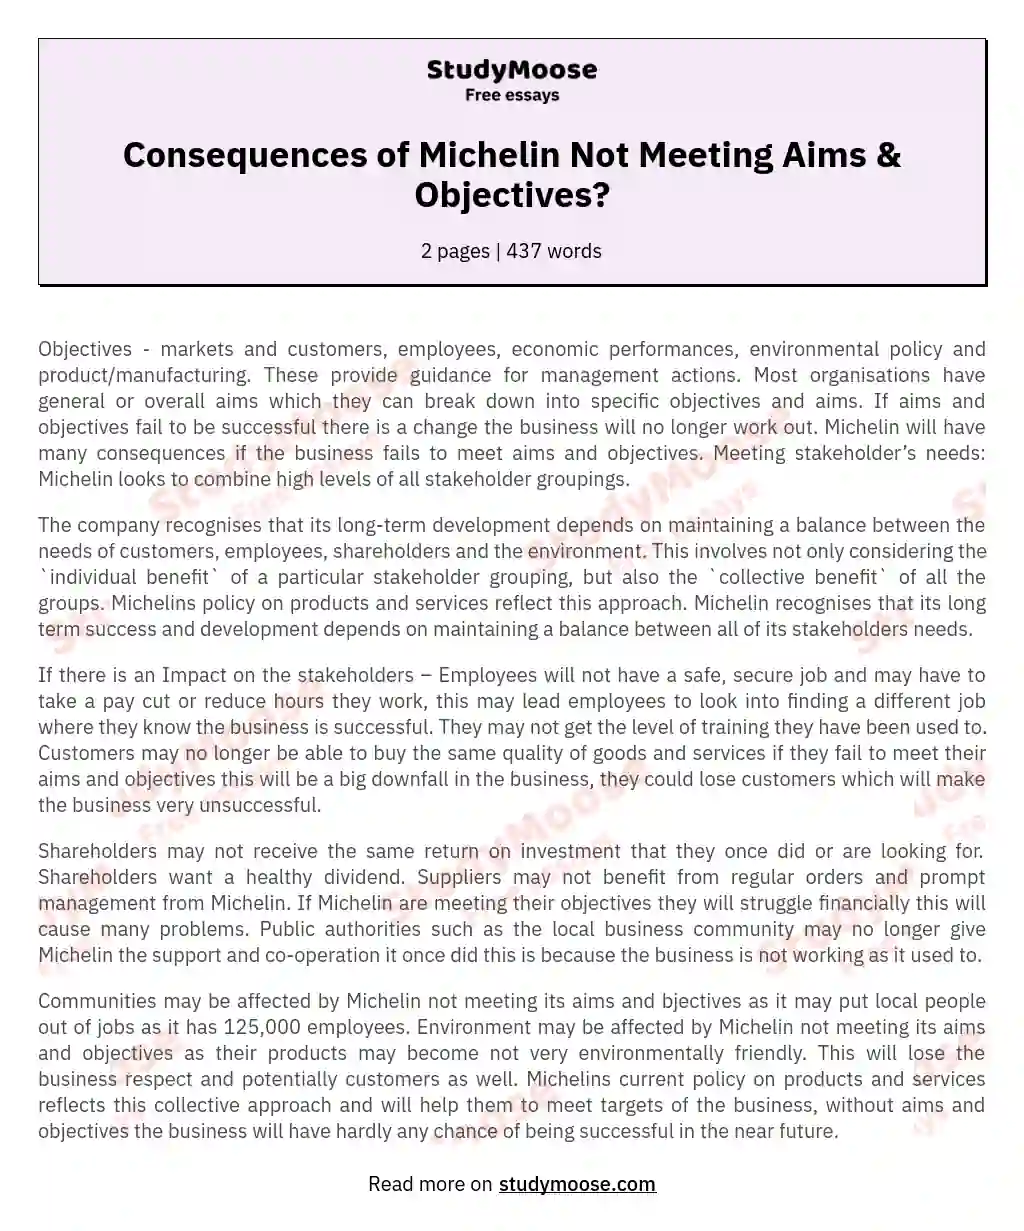 Consequences of Michelin Not Meeting Aims & Objectives? essay